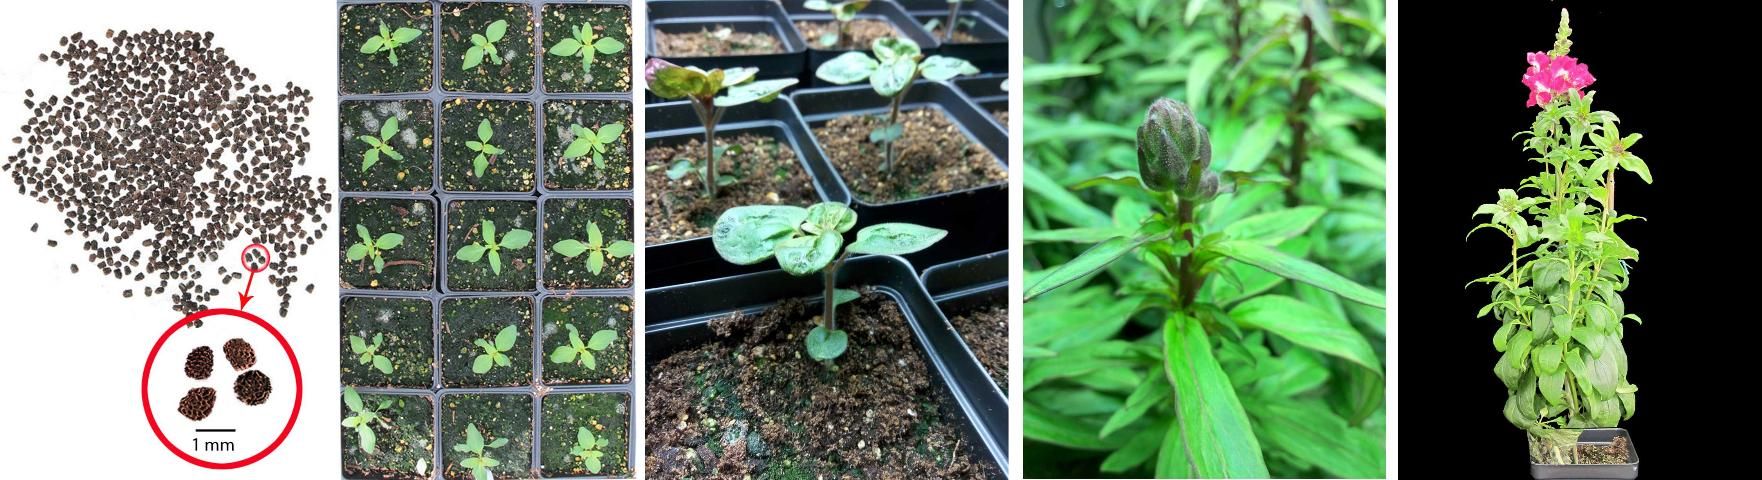 Figure 5. Different growth stages of snapdragons. (A) Snapdragon seeds; (B) one-week-old snapdragon seedlings; (C) three-week-old seedlings; (D) bolting of snapdragon; (E) blooming spike with 5–6 florets.